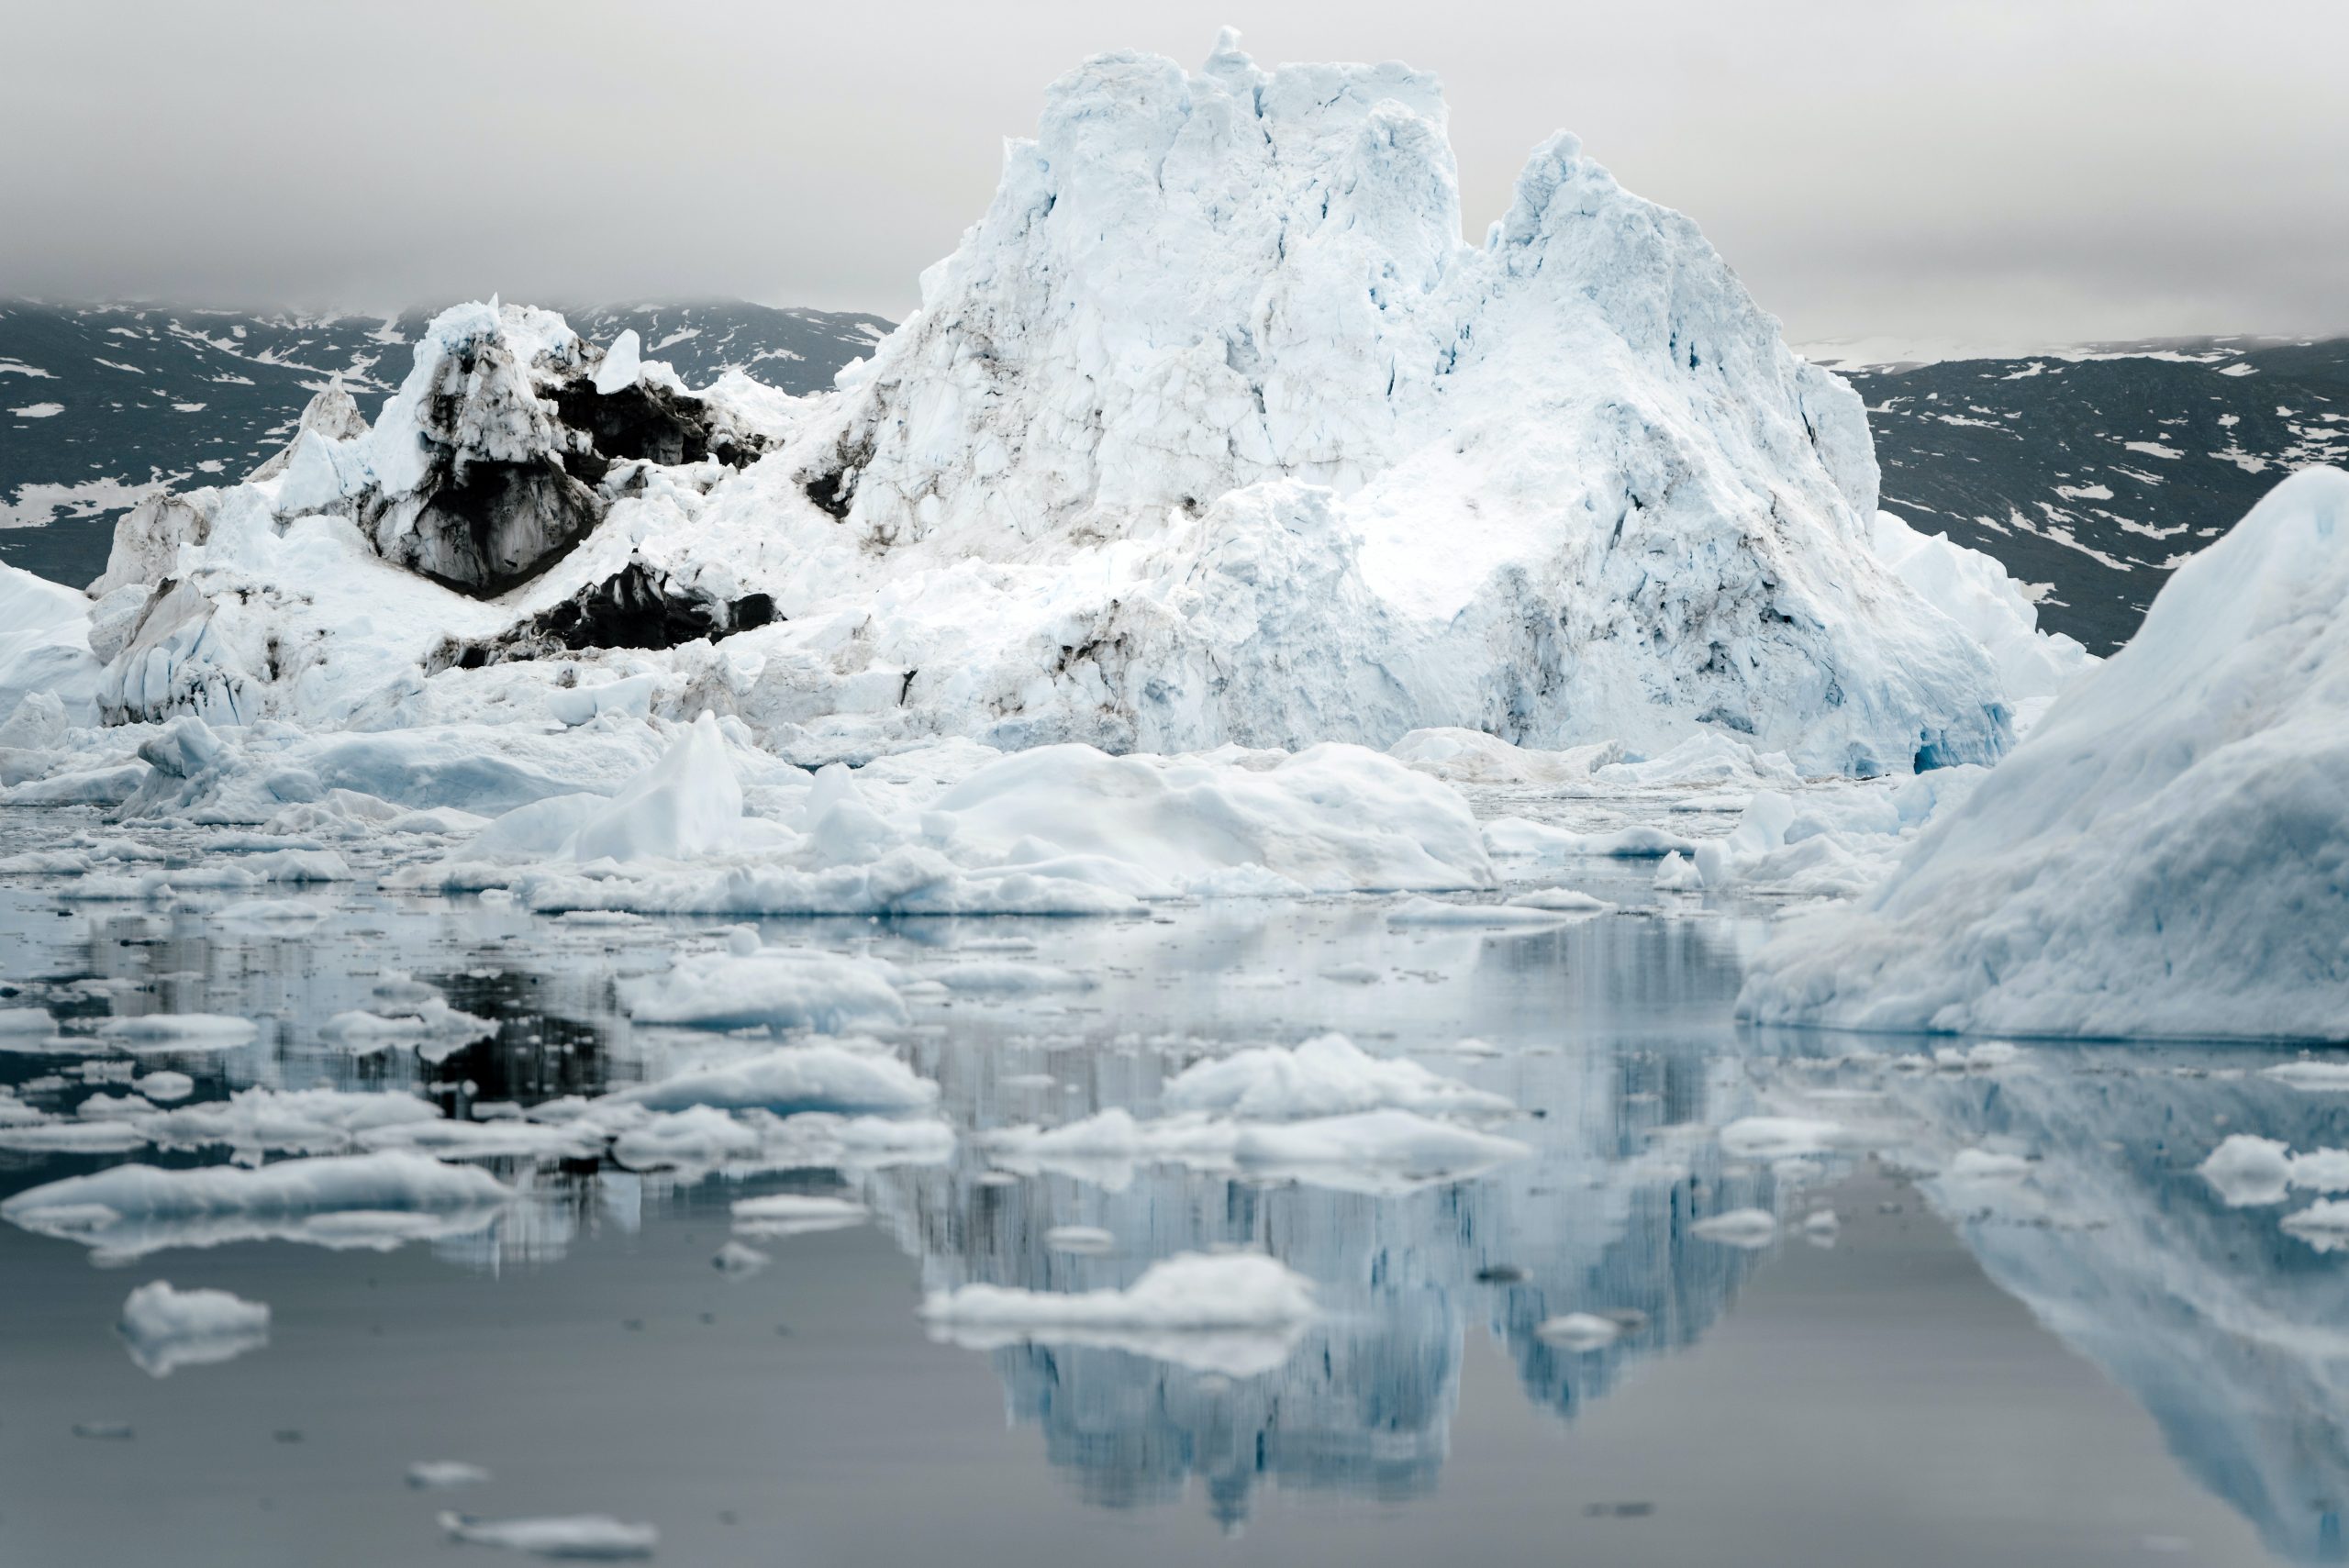 image of a large melting ice cap surrounded by broken ice on a body of water